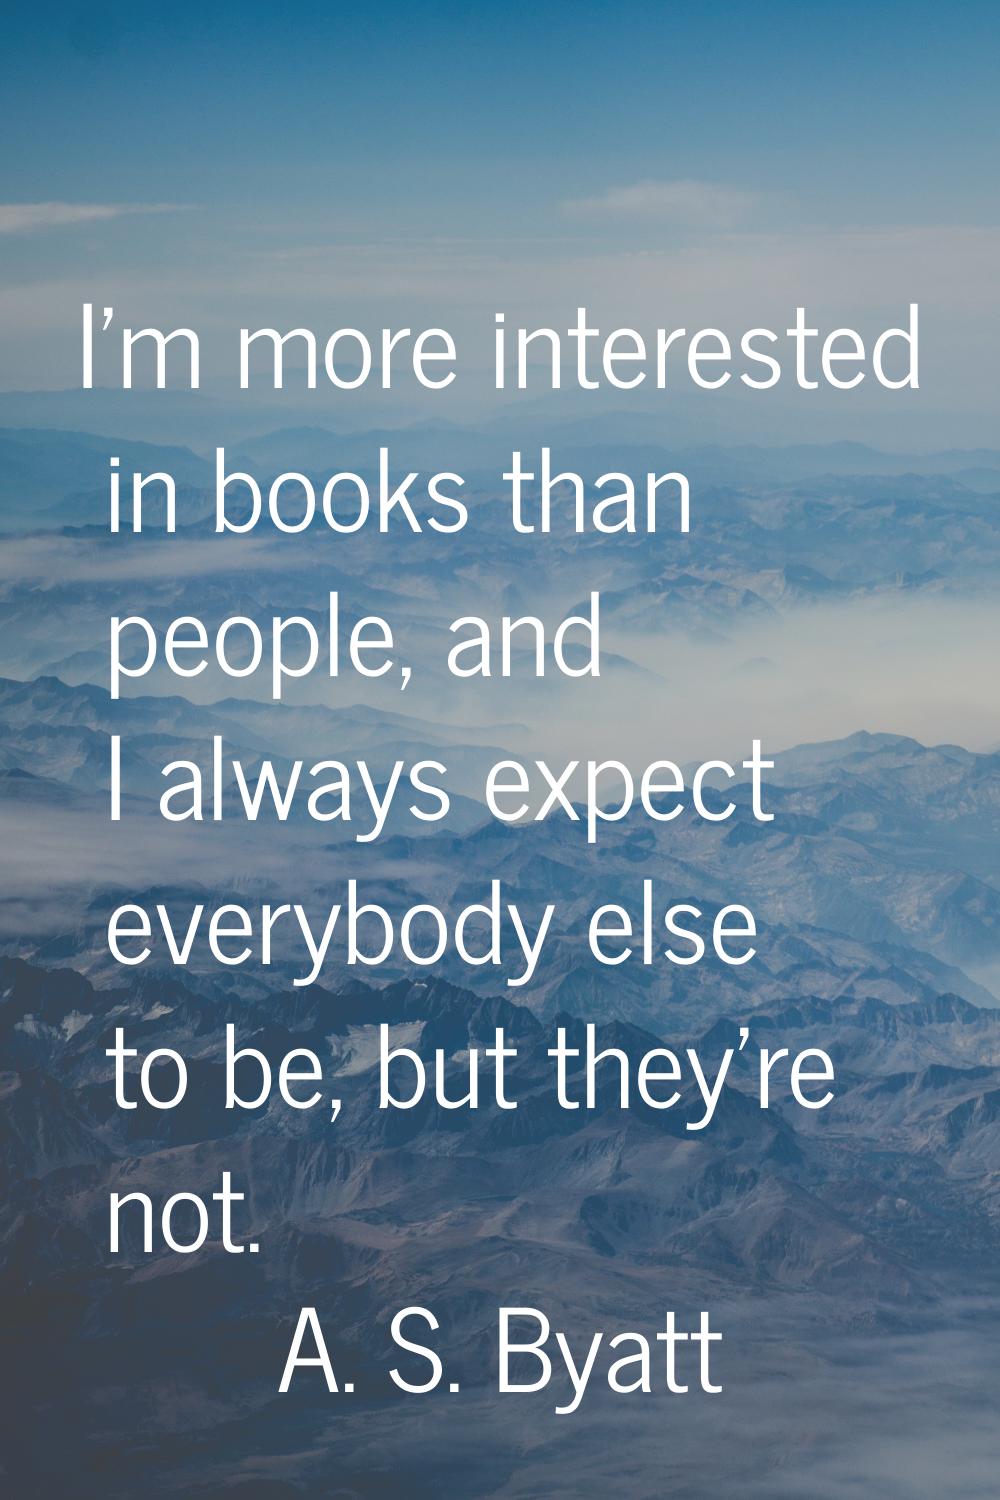 I'm more interested in books than people, and I always expect everybody else to be, but they're not